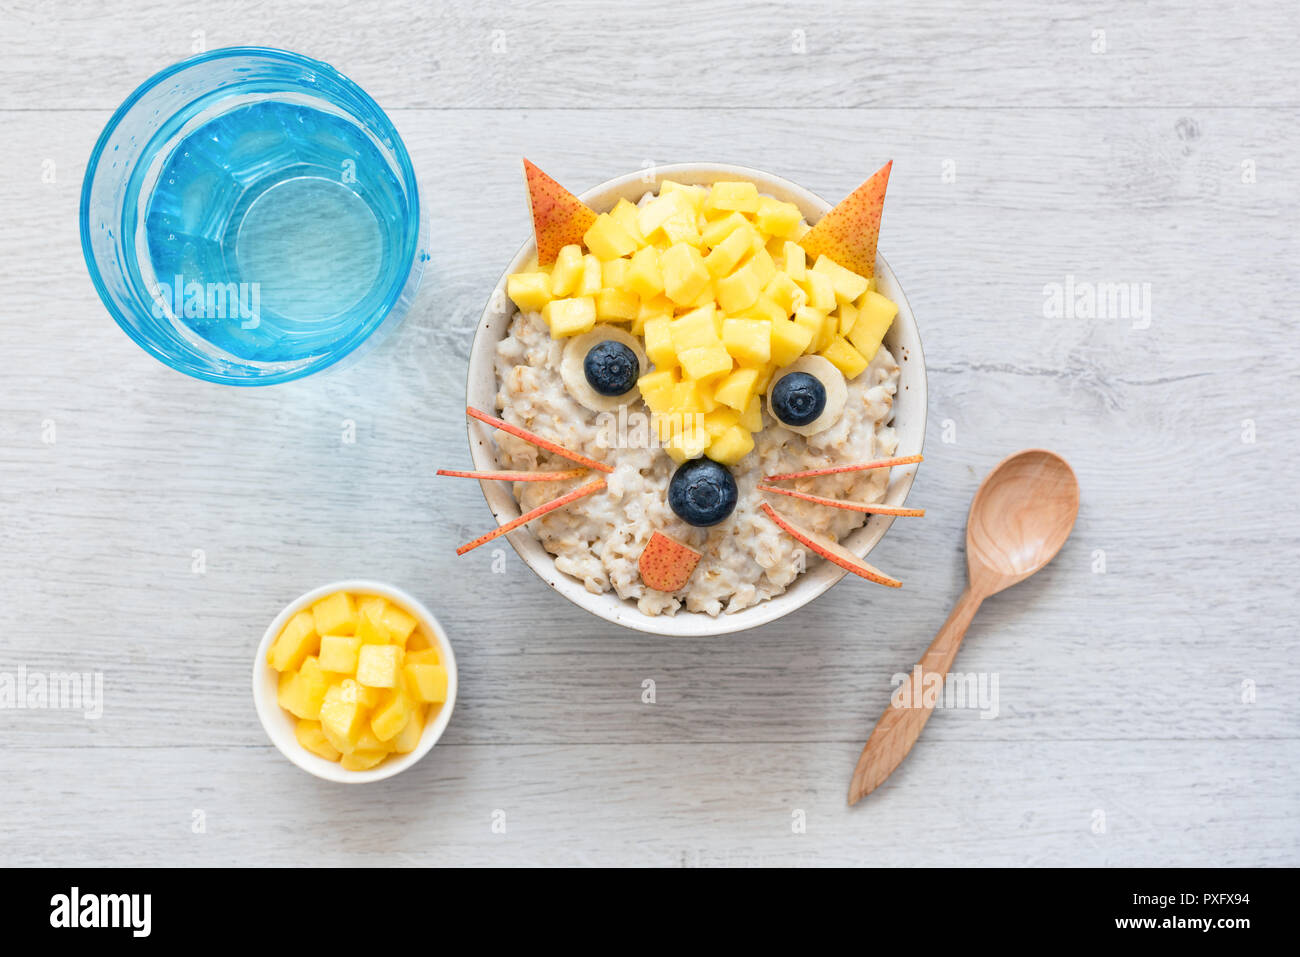 Healthy Funny Cute Breakfast For Kids. Oatmeal Porridge Decorated As Fox With Fruits Berries. Food Art. Creative Food Idea For Children Stock Photo